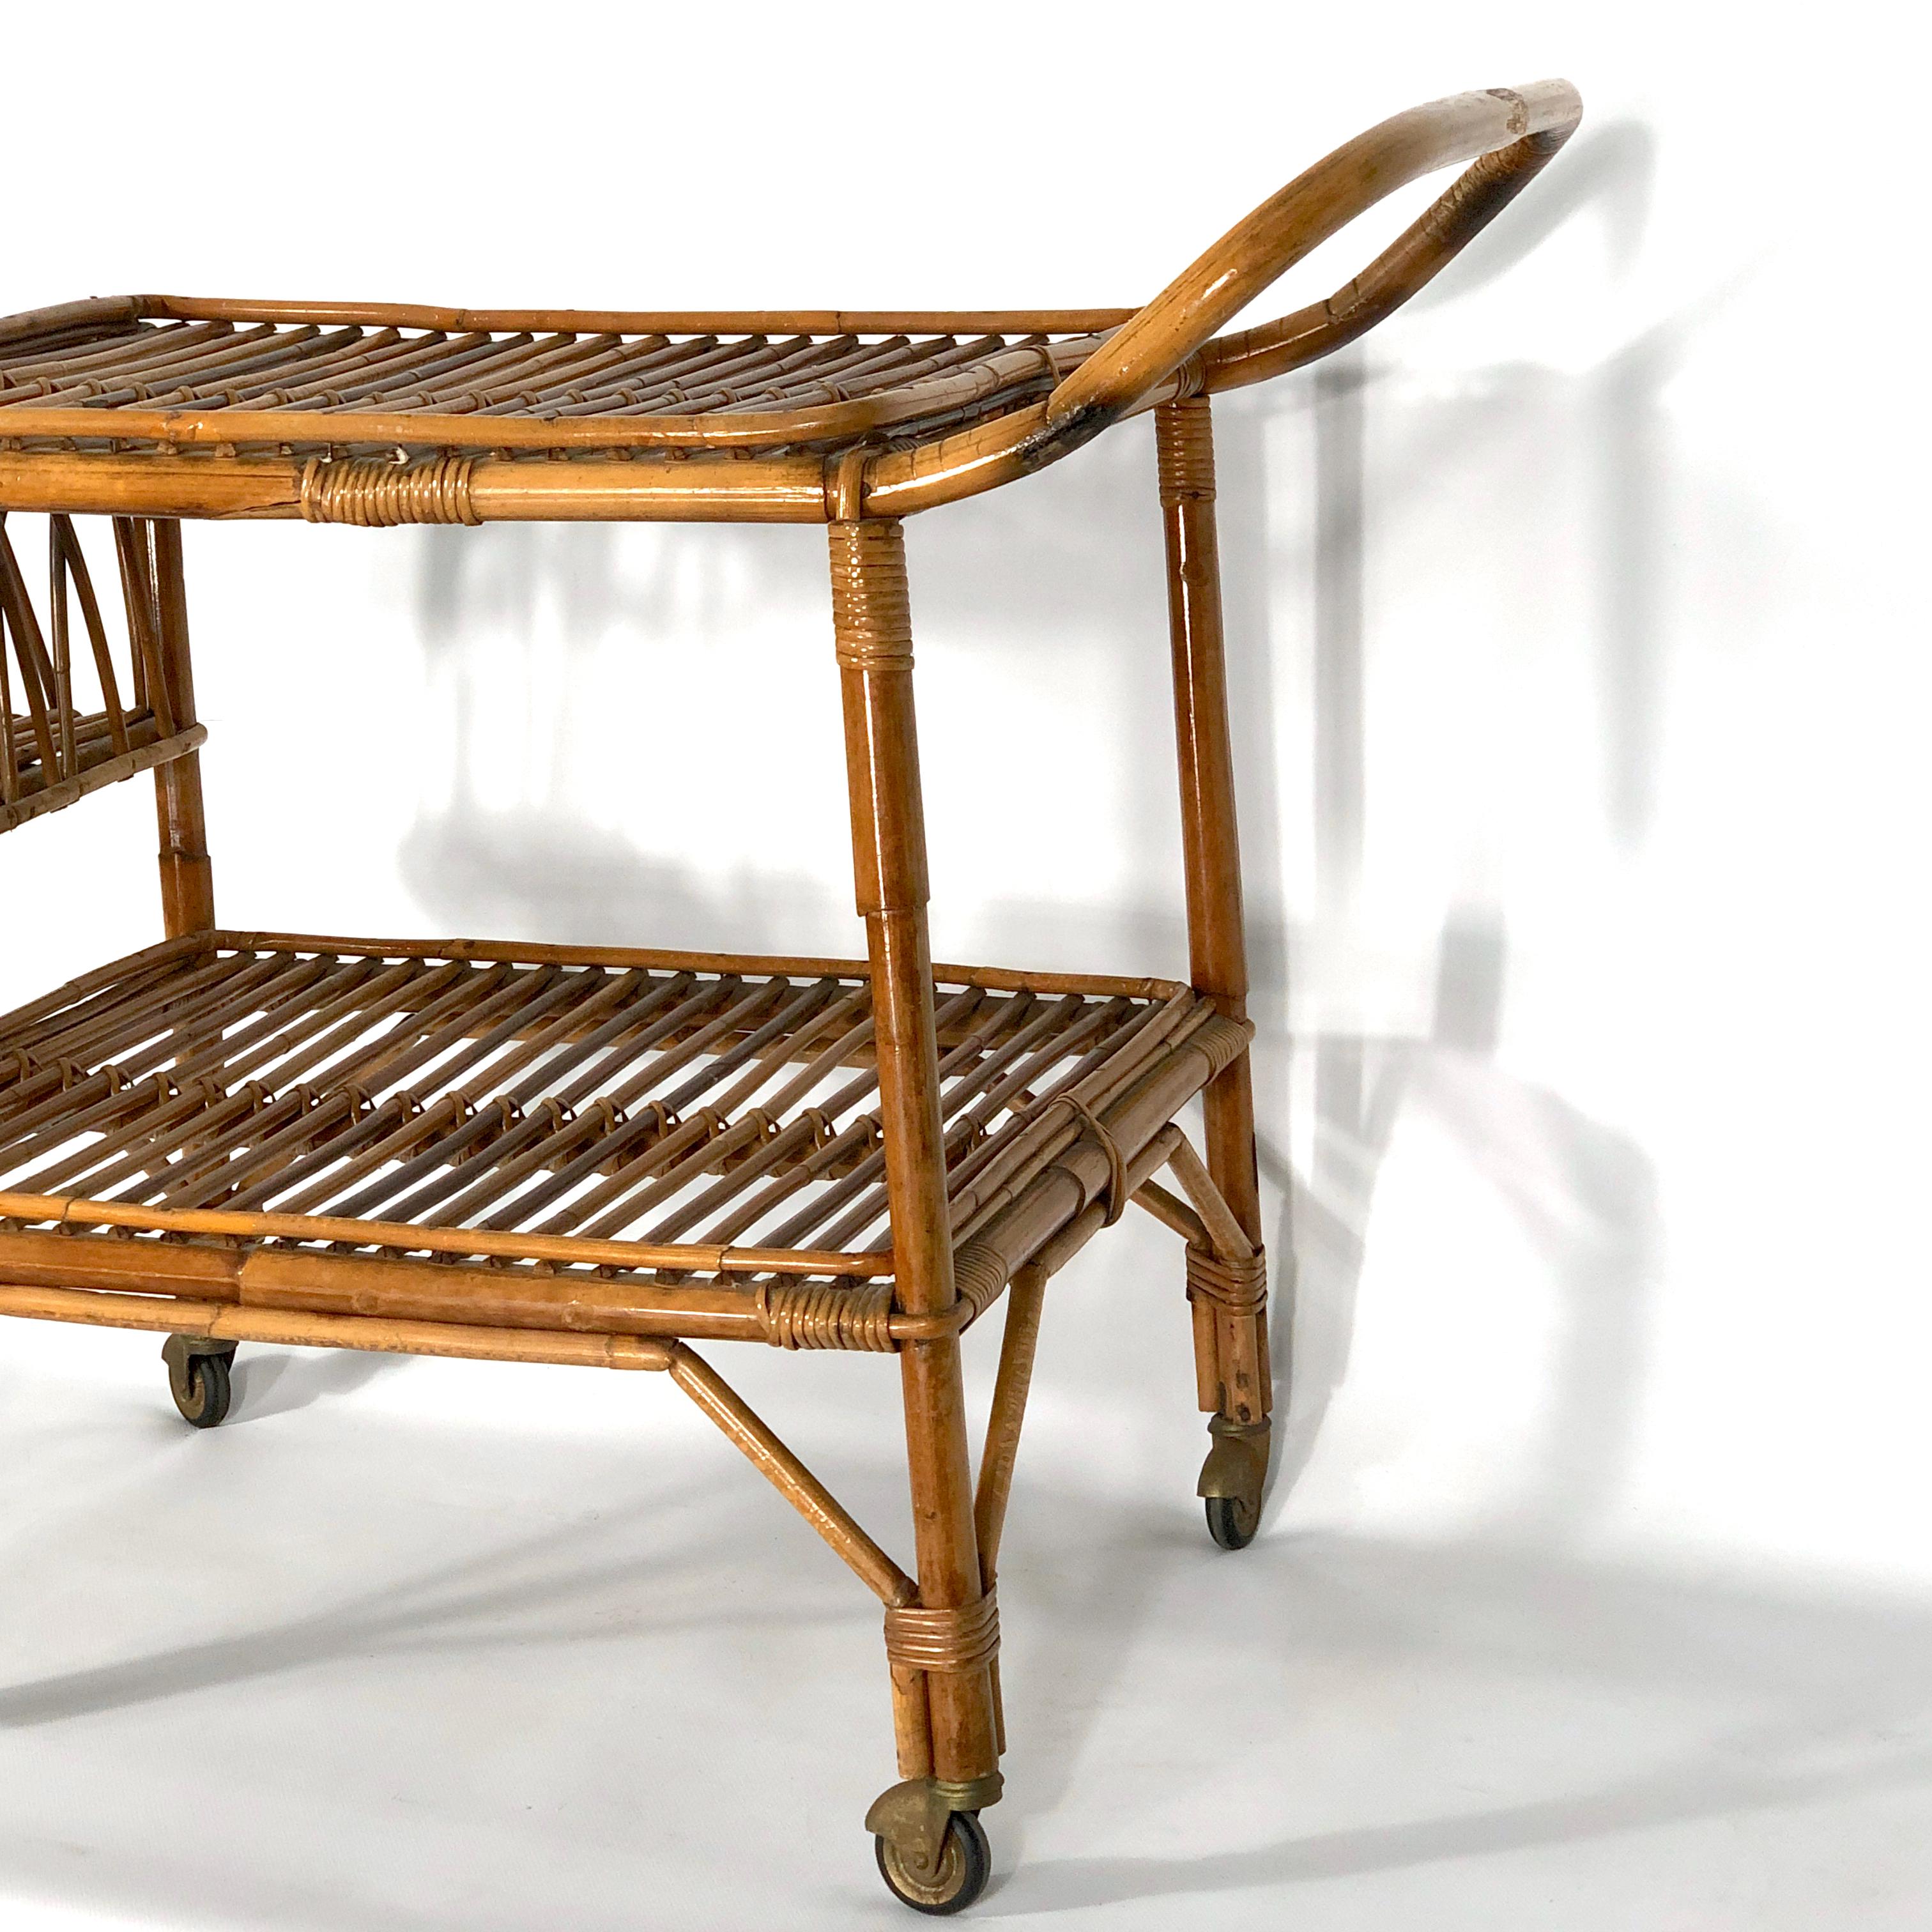 Great vintage condition for this bar cart made from bamboo and produced in Italy during the 50s.